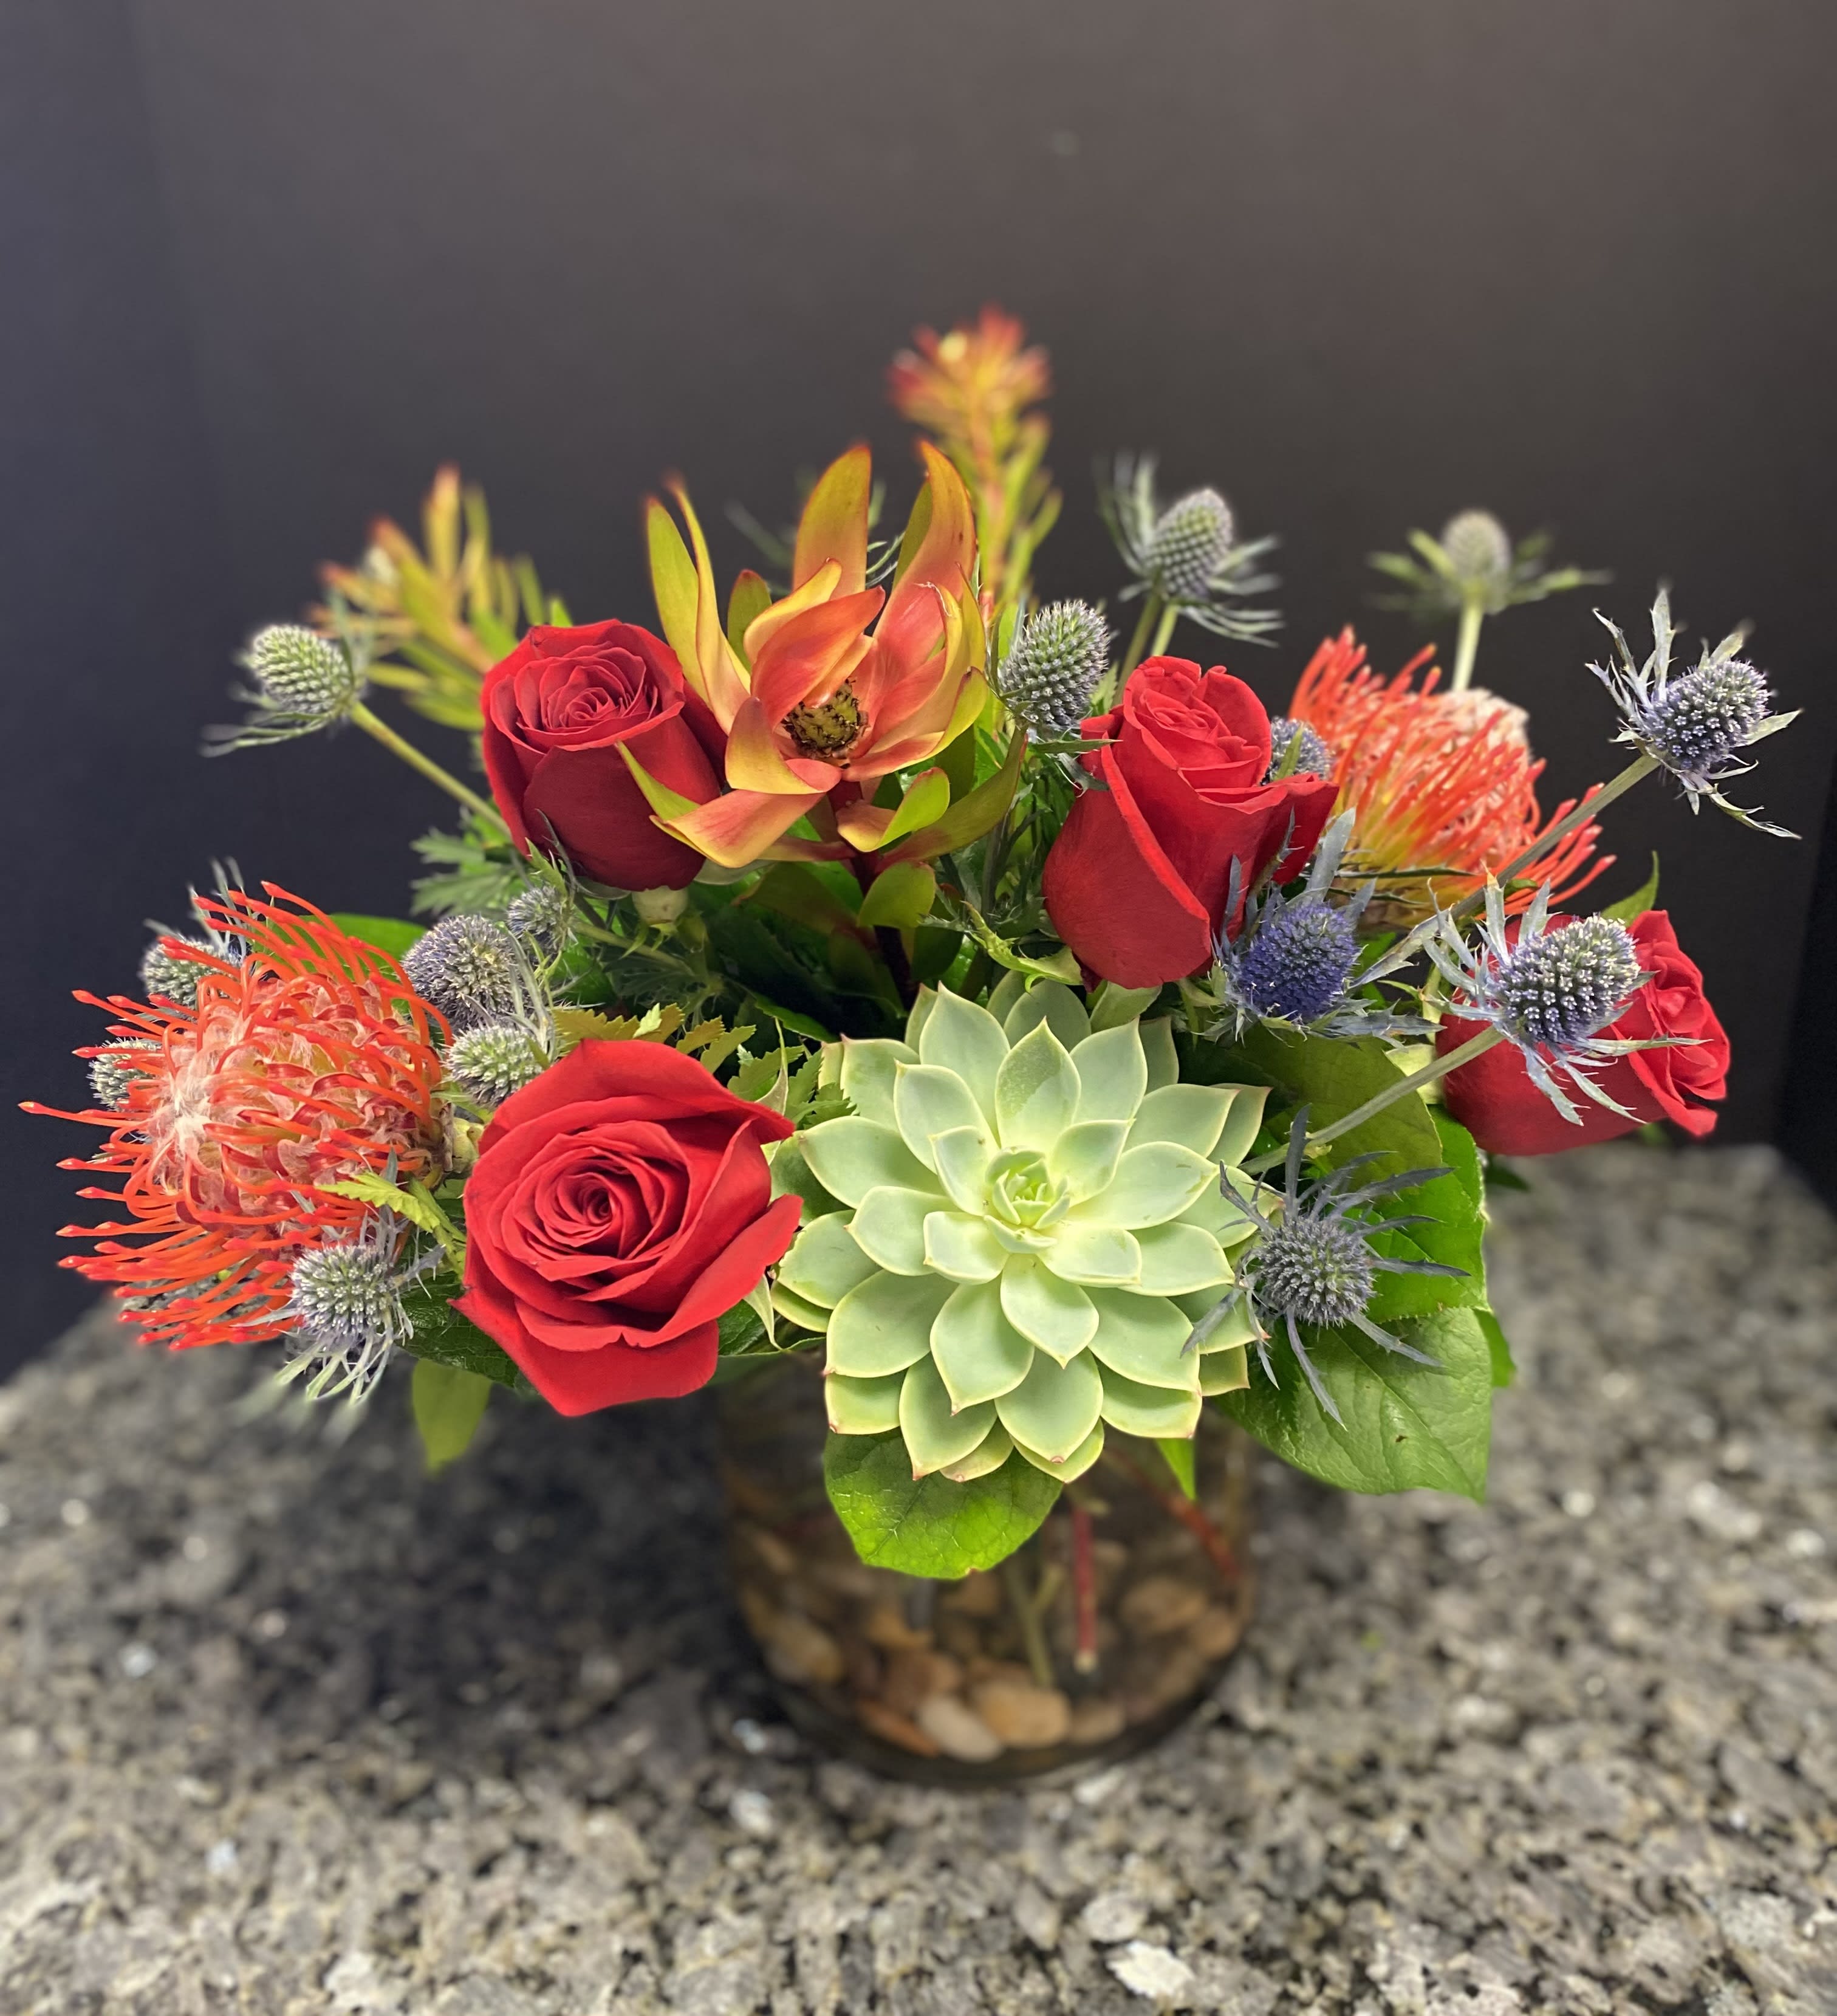 Sunset Love - An Arizona Themed, Low and Airy, Arrangement with Pebble Rocks for a Desert Vibe. 